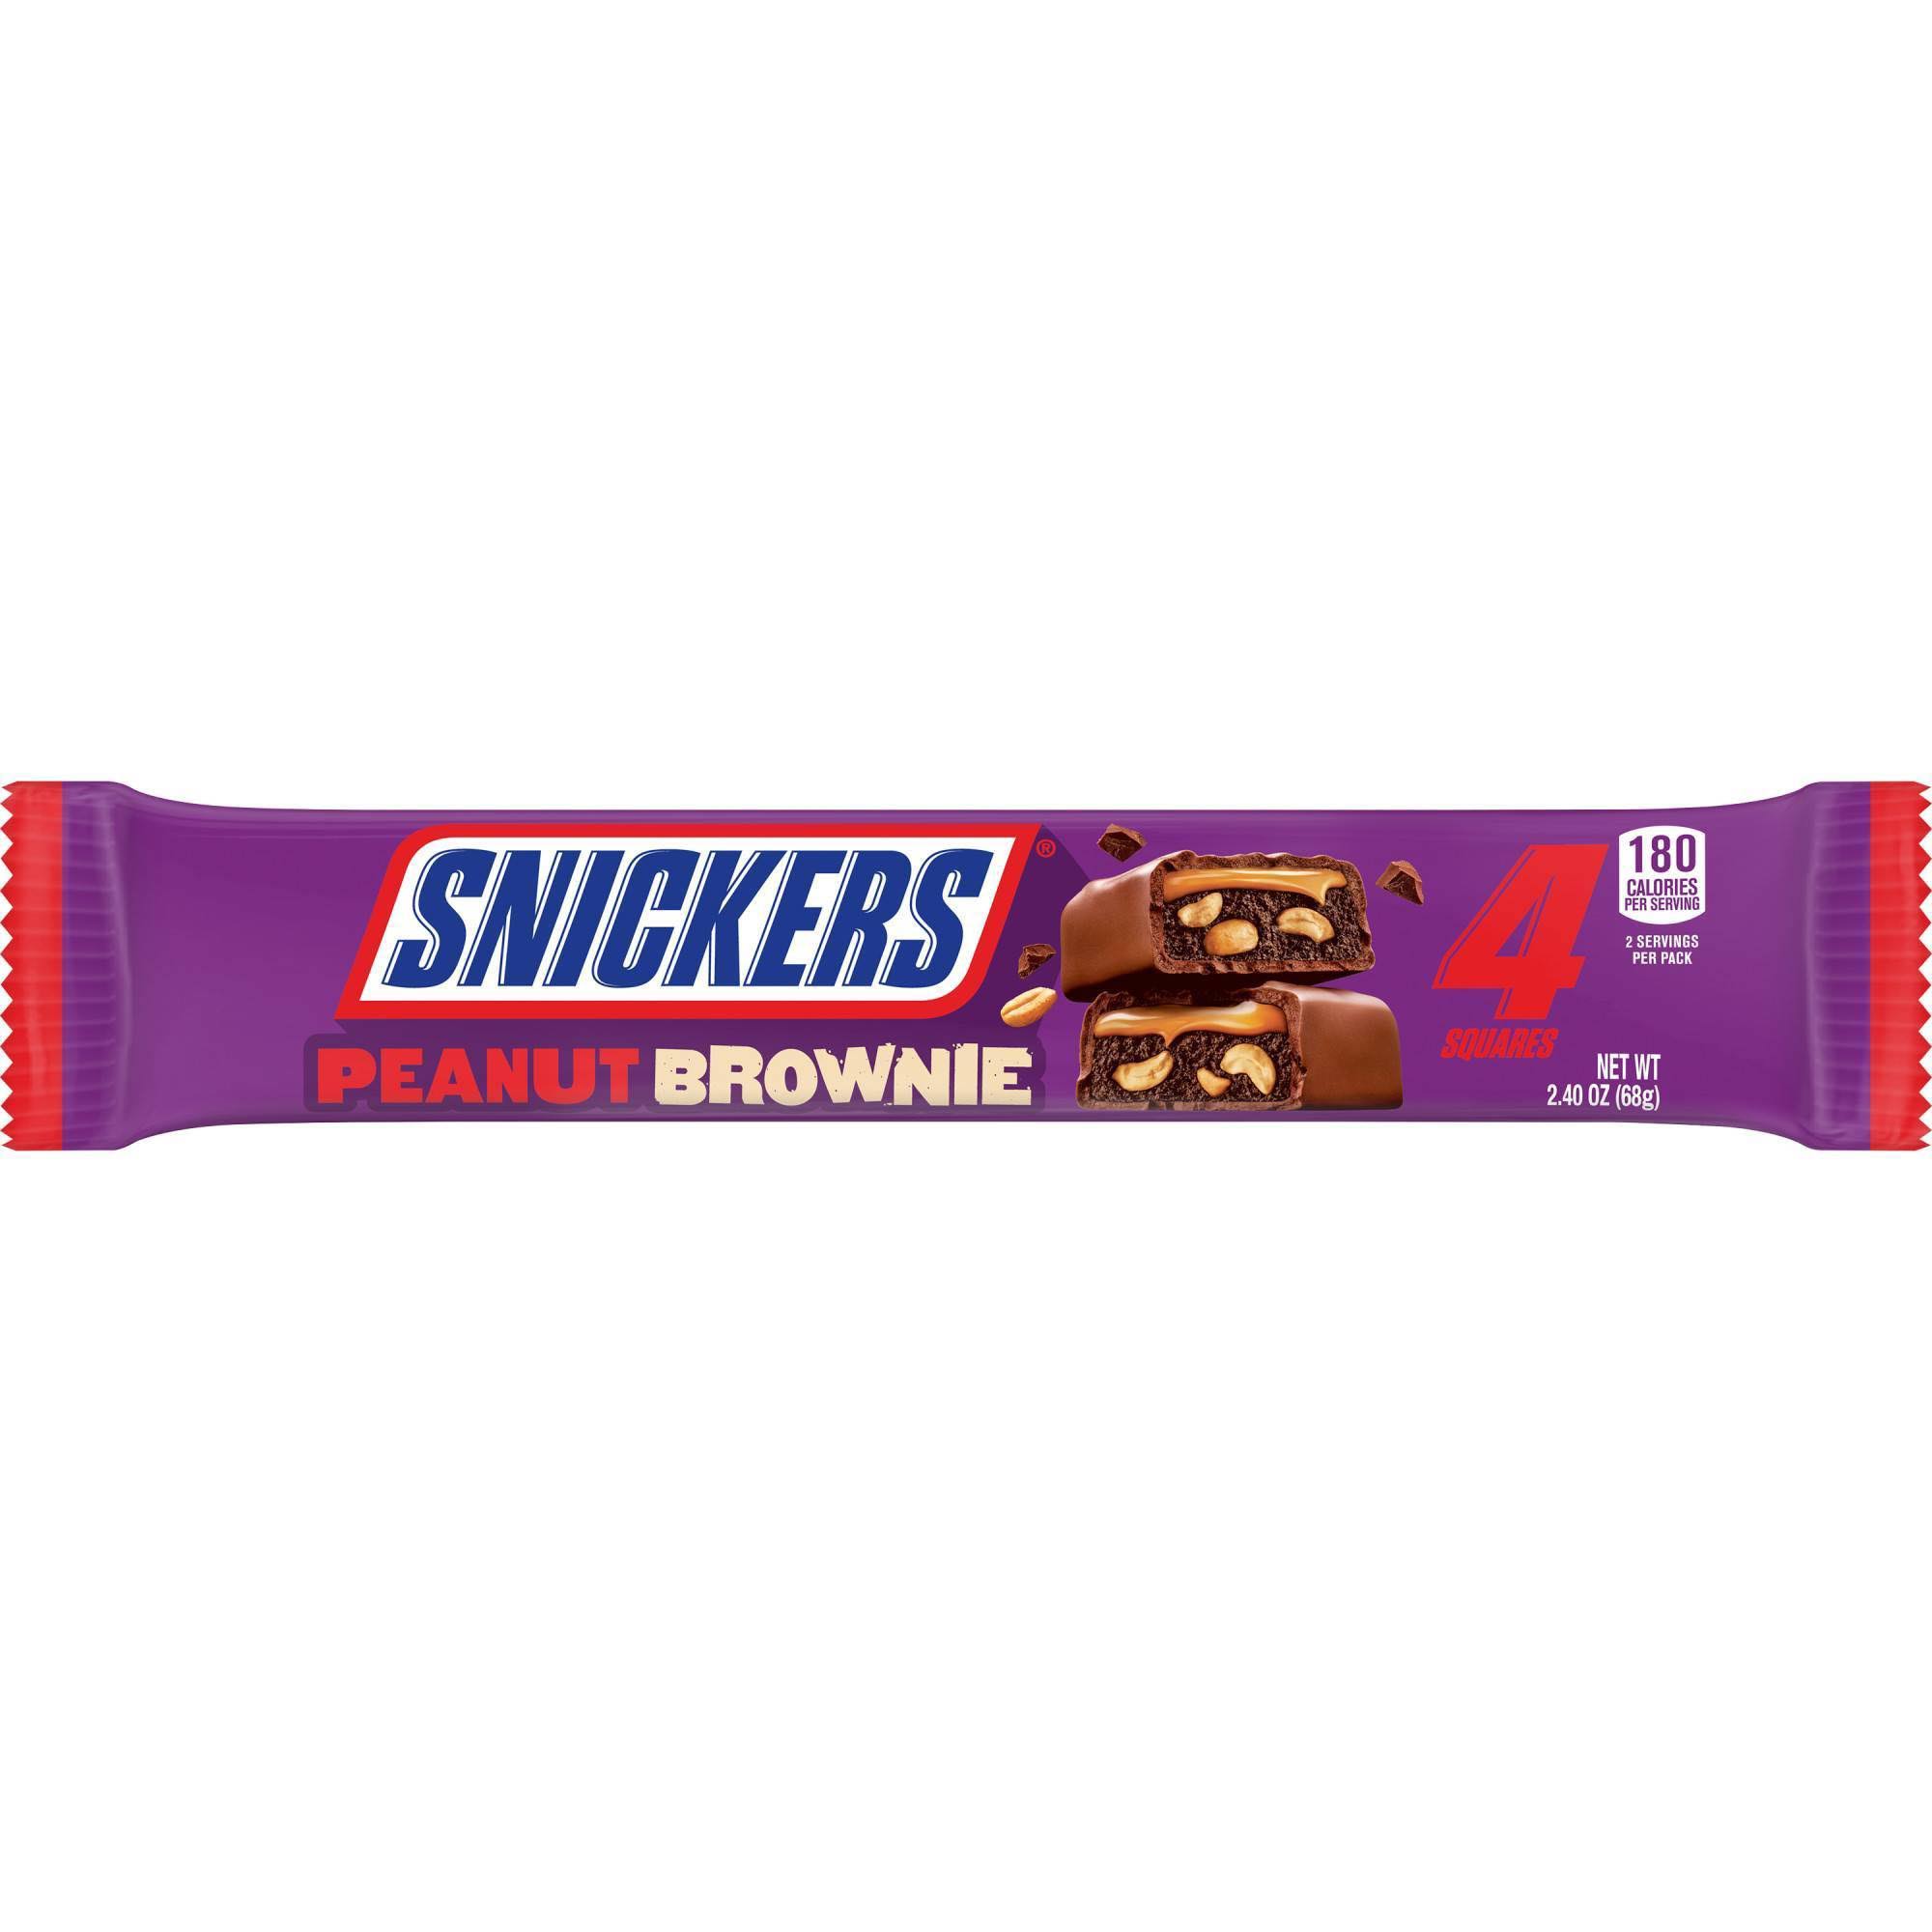 Snickers Peanut Brownie Squares Chocolate Candy Bar, 2.4 oz